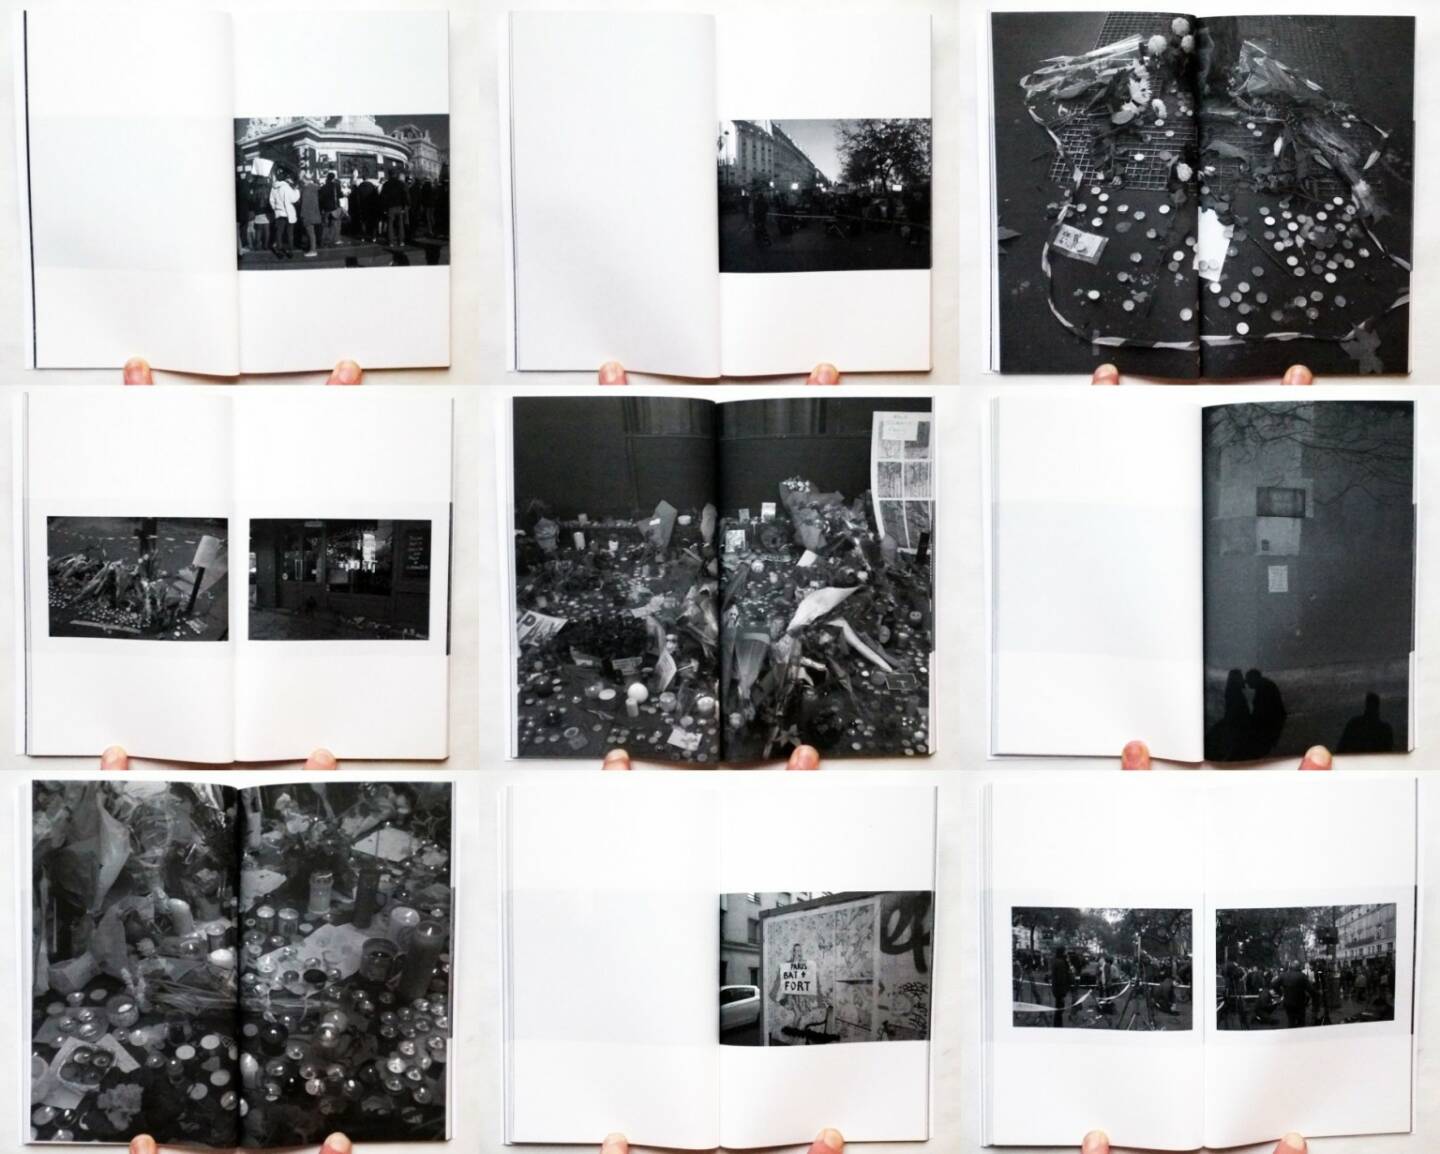 Pascal Anders - aftermath, Self published 2015, Beispielseiten, sample spreads - http://josefchladek.com/book/pascal_anders_-_aftermath